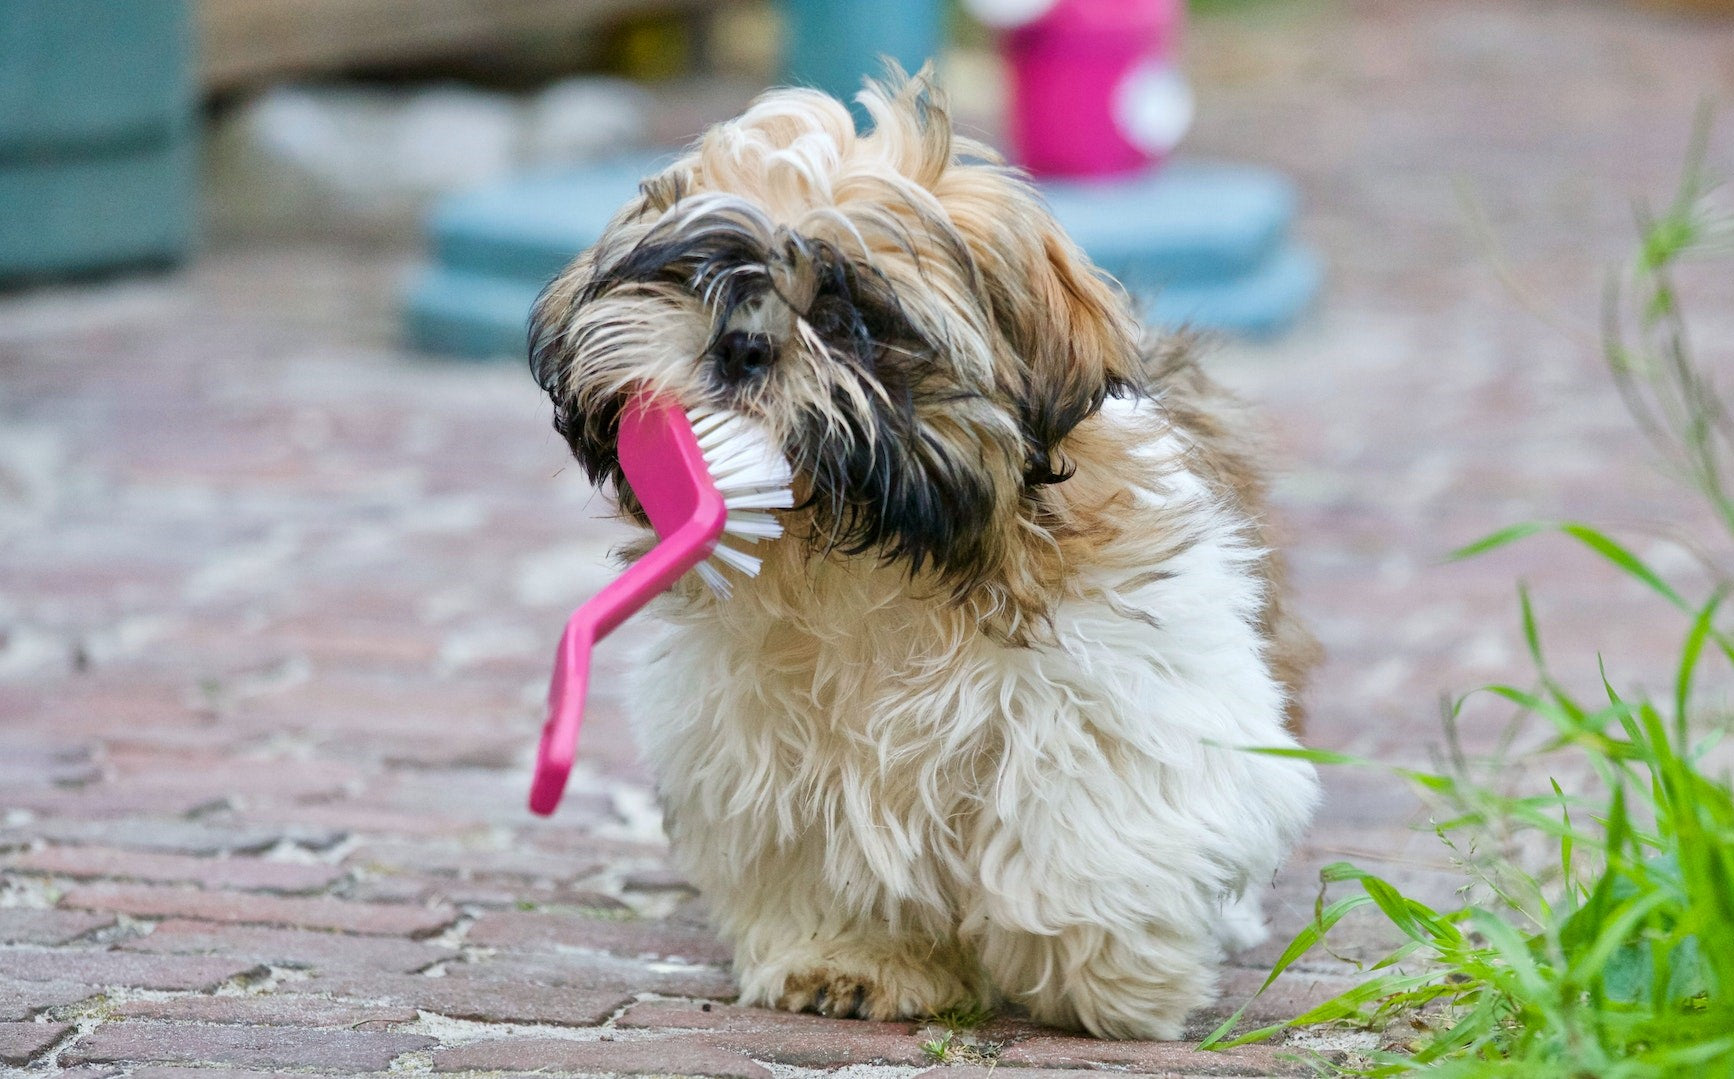 How to Prevent Dental Disease in Dogs